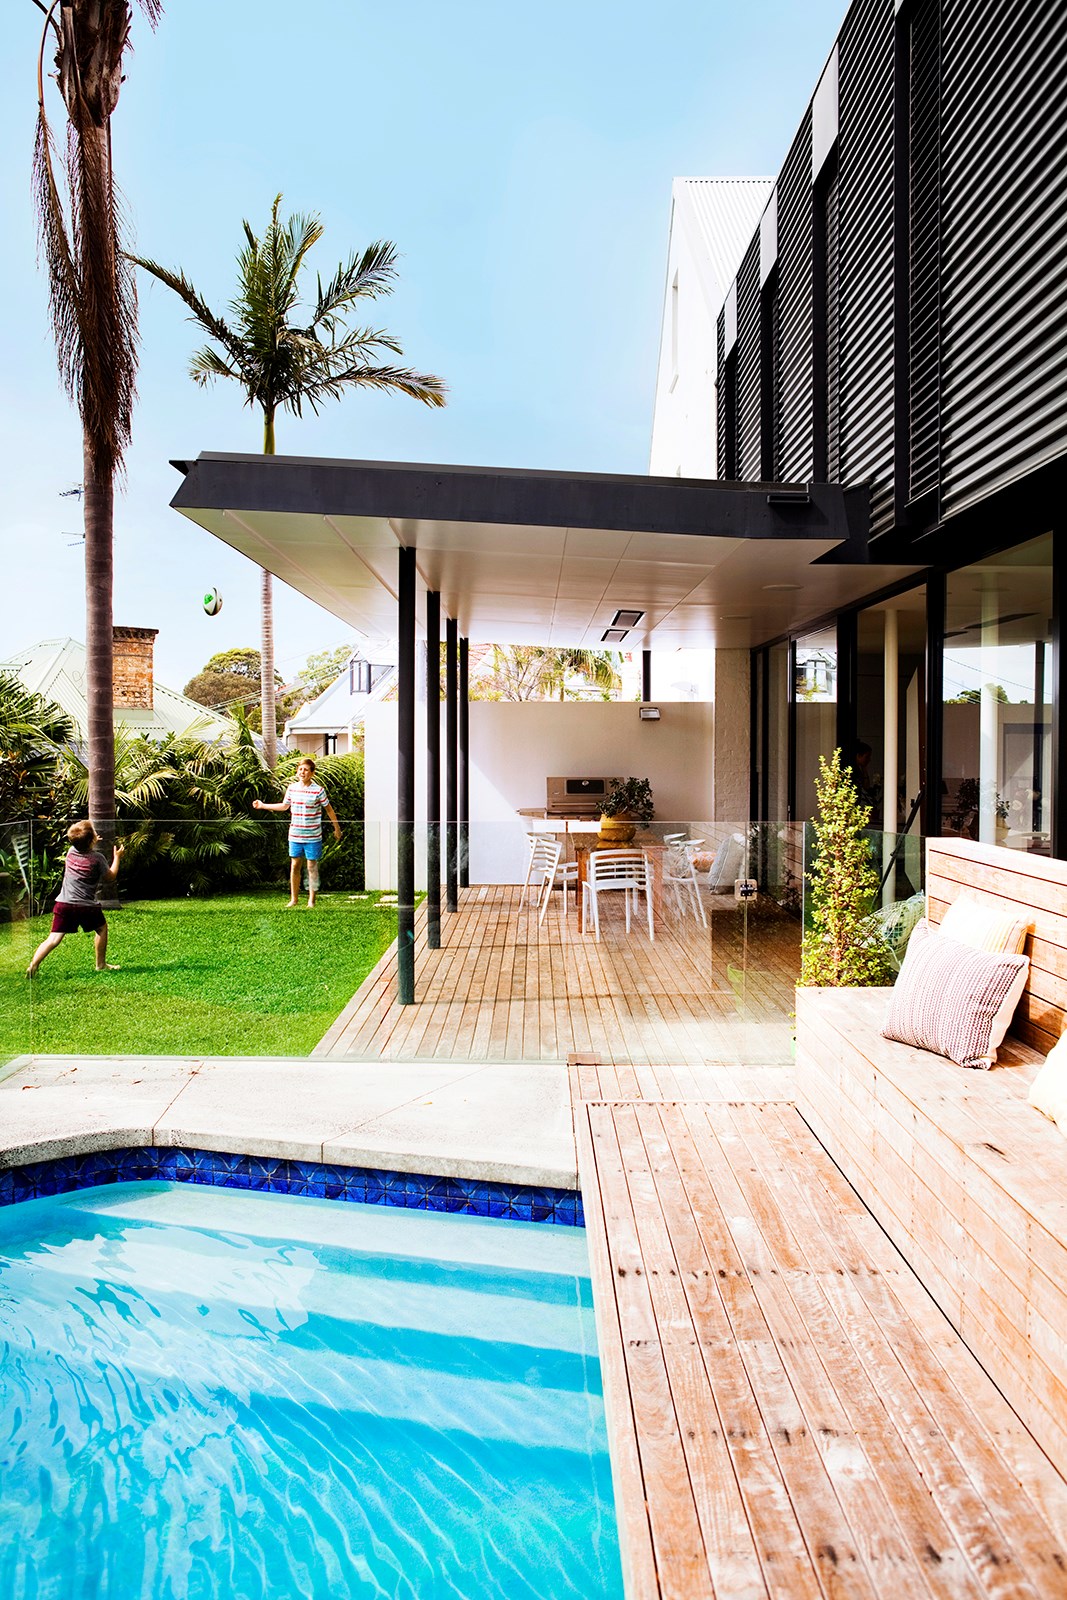 While you're deciding which pool is right for you, be inspired by [our gallery of cutting edge pool designs](http://www.homestolove.com.au/6-luxury-swimming-pools-and-their-budgets-1949|target="_blank"). Photo: Chris Warnes